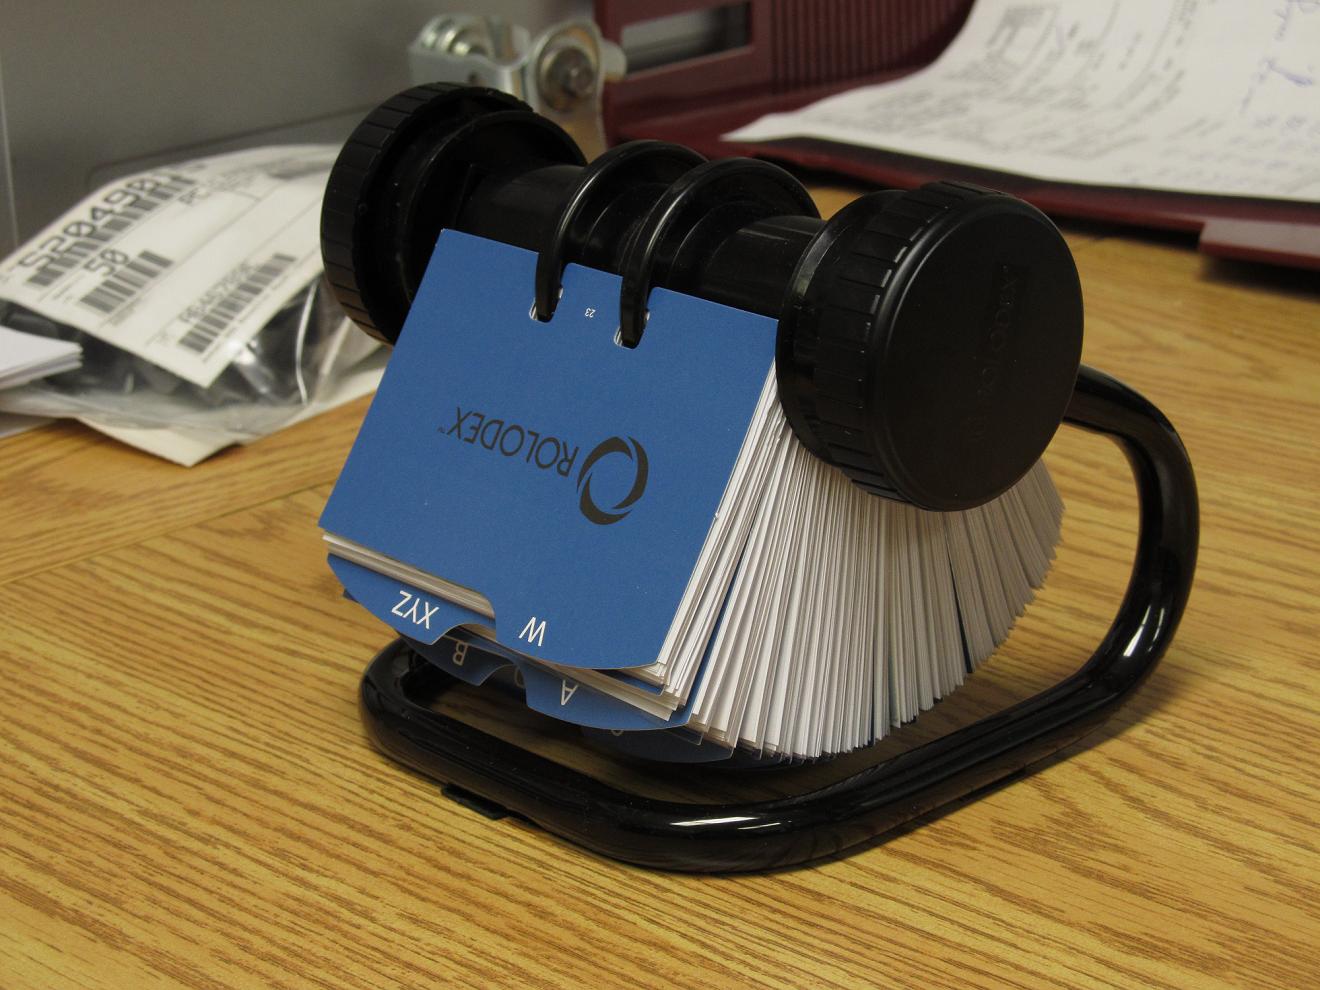 File:Rolodex™ 67236 Rotary Business Card File.jpg - Wikimedia Commons